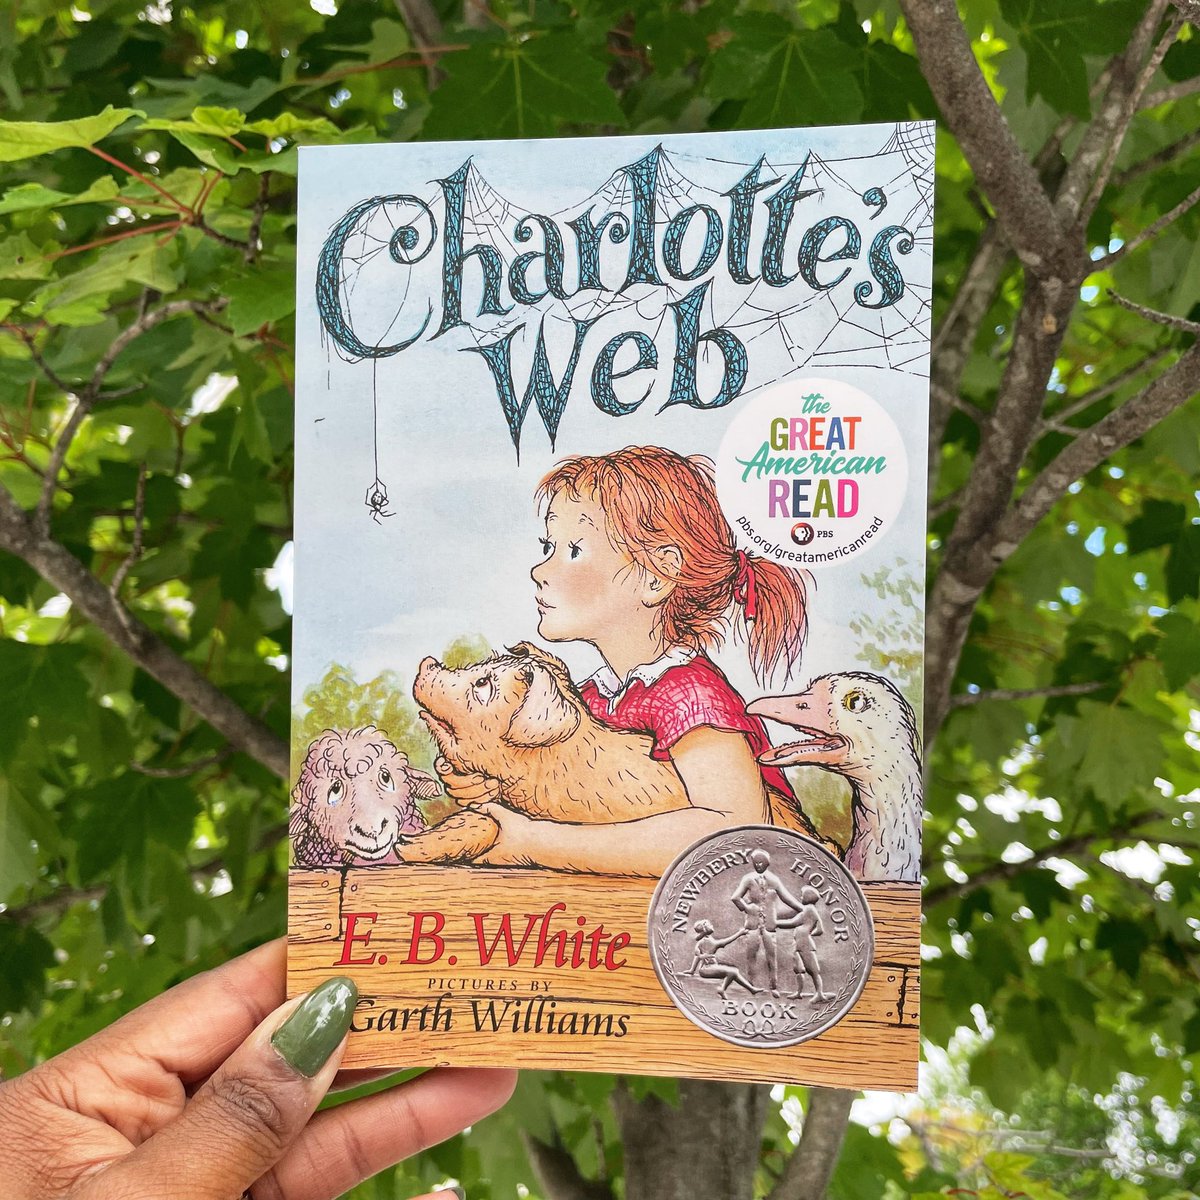 For National Children’s Day, pick up our summer Children’s Classic and read about the friendship between a pig and a spider.

#BNBuzz #BNTheKnow #iloveit #bnbirkdale #BNMagic #BNBookFun #yeahTHATbn #ourbn #NationalChildrensDay #BNClassic #BNYoungReaders